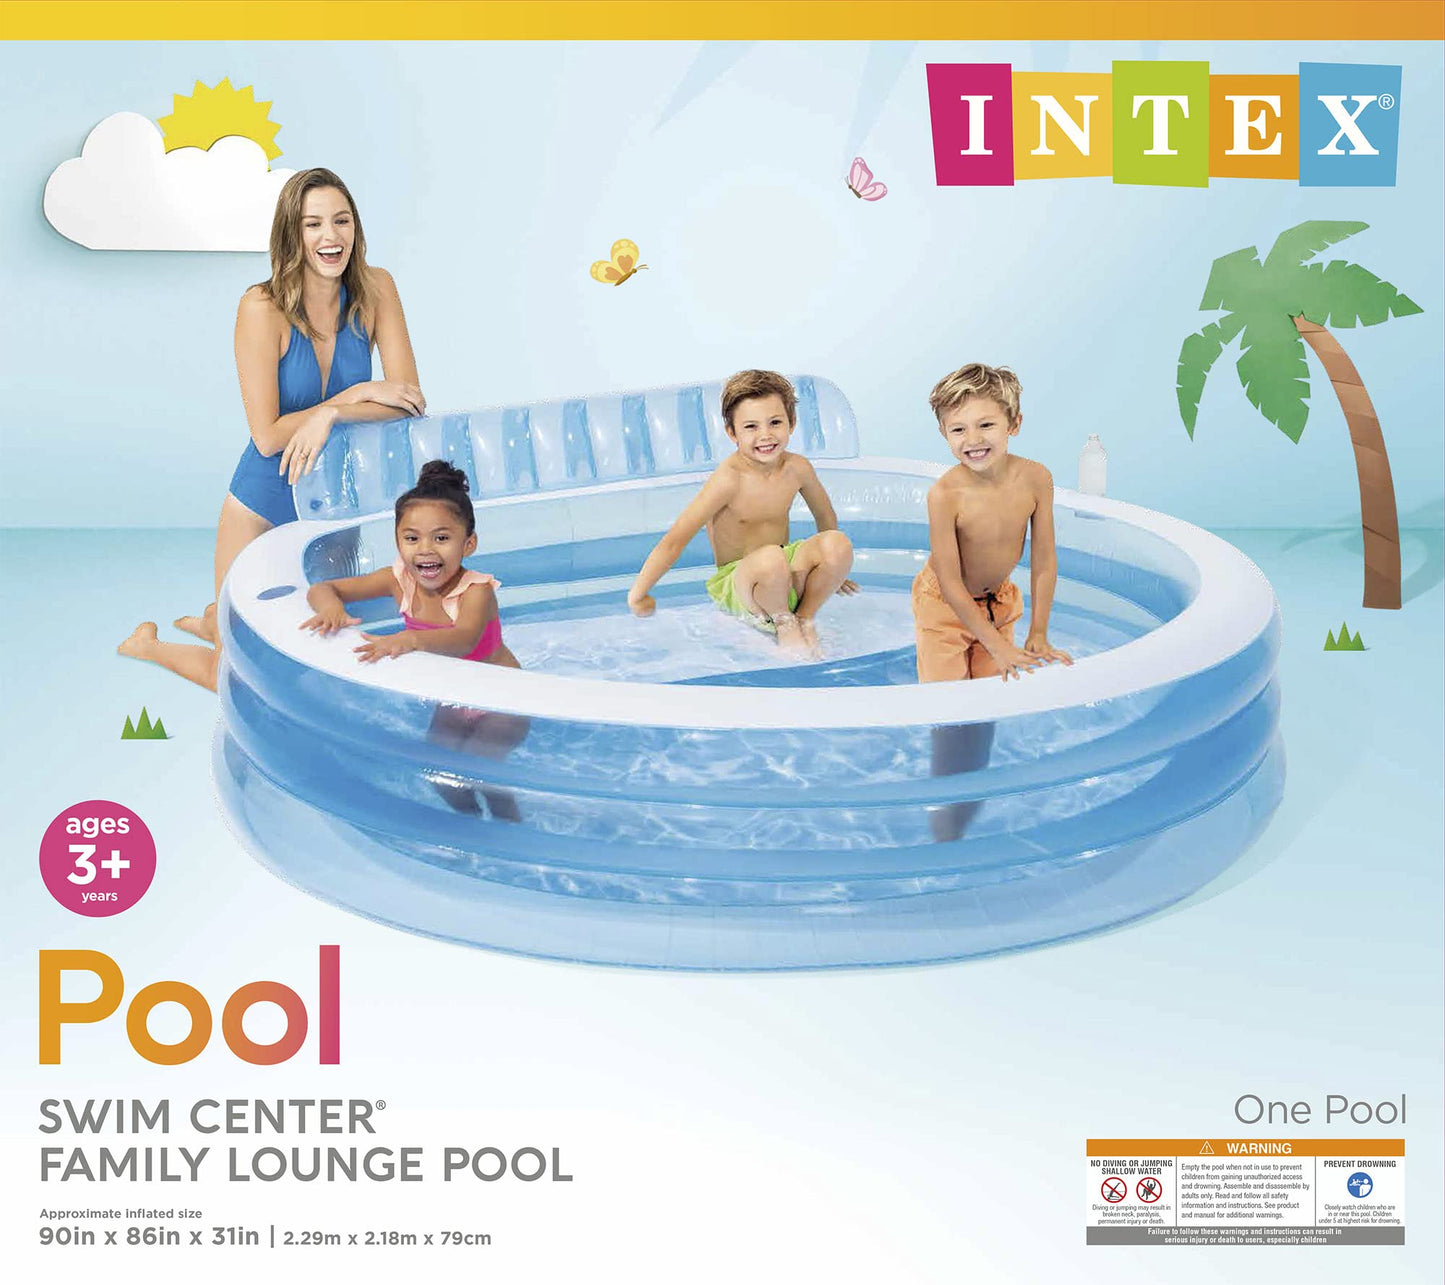 Intex Family Lounge Pool, 90" x 86" x 31", Ages 3+